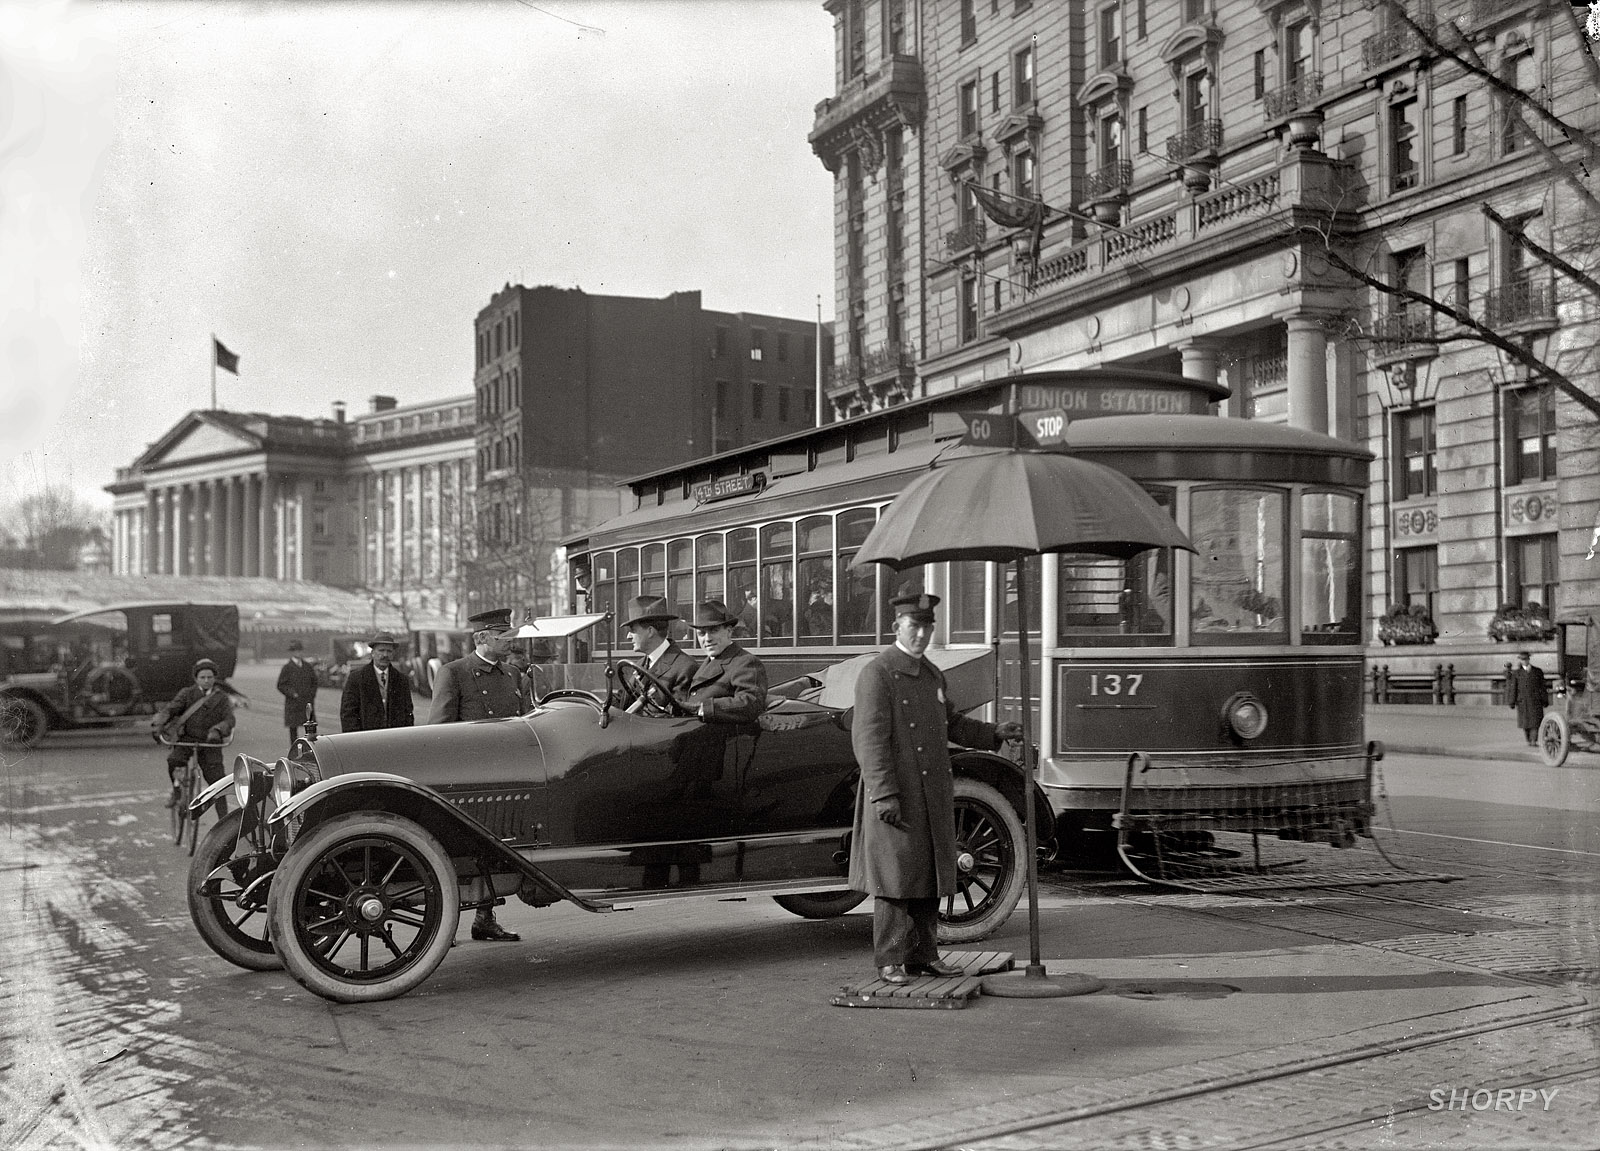 "District of Columbia, 1917. Traffic Stop and Go signs." Traffic safety in Washington with the Treasury building at left. Note the pedestrian-catcher on the streetcar. Harris & Ewing Collection glass negative. View full size.